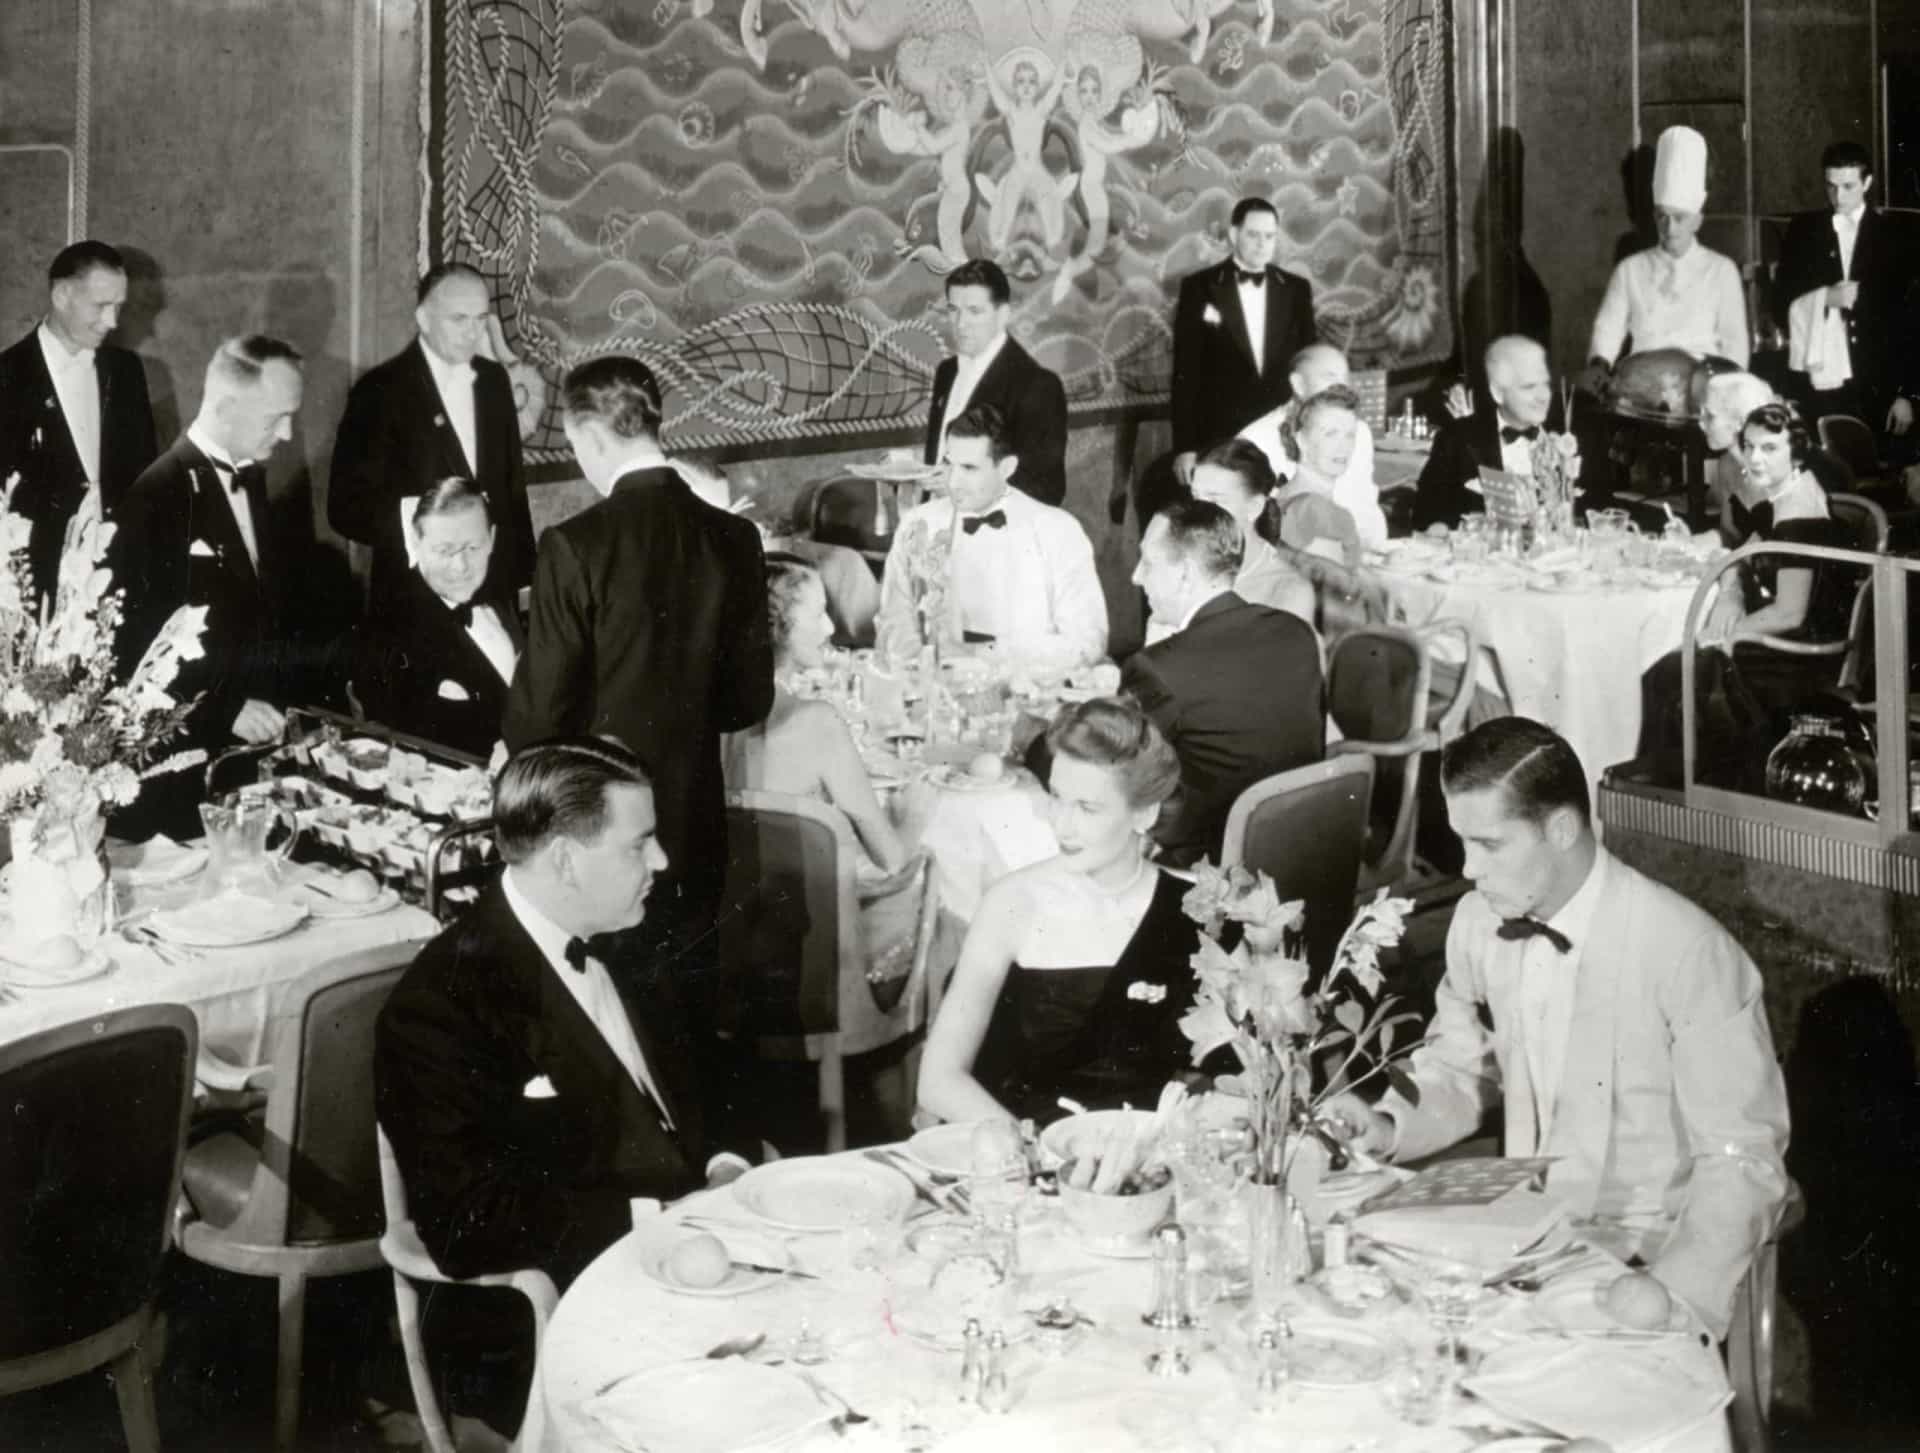 <p>With longer routes came more highly-refined passenger facilities. The first à la carte restaurants appeared on passenger vessels around 1910.</p><p>You may also like:<a href="https://www.starsinsider.com/n/413073?utm_source=msn.com&utm_medium=display&utm_campaign=referral_description&utm_content=597926en-za"> Who'd have guessed that these celebrities are the same age?</a></p>